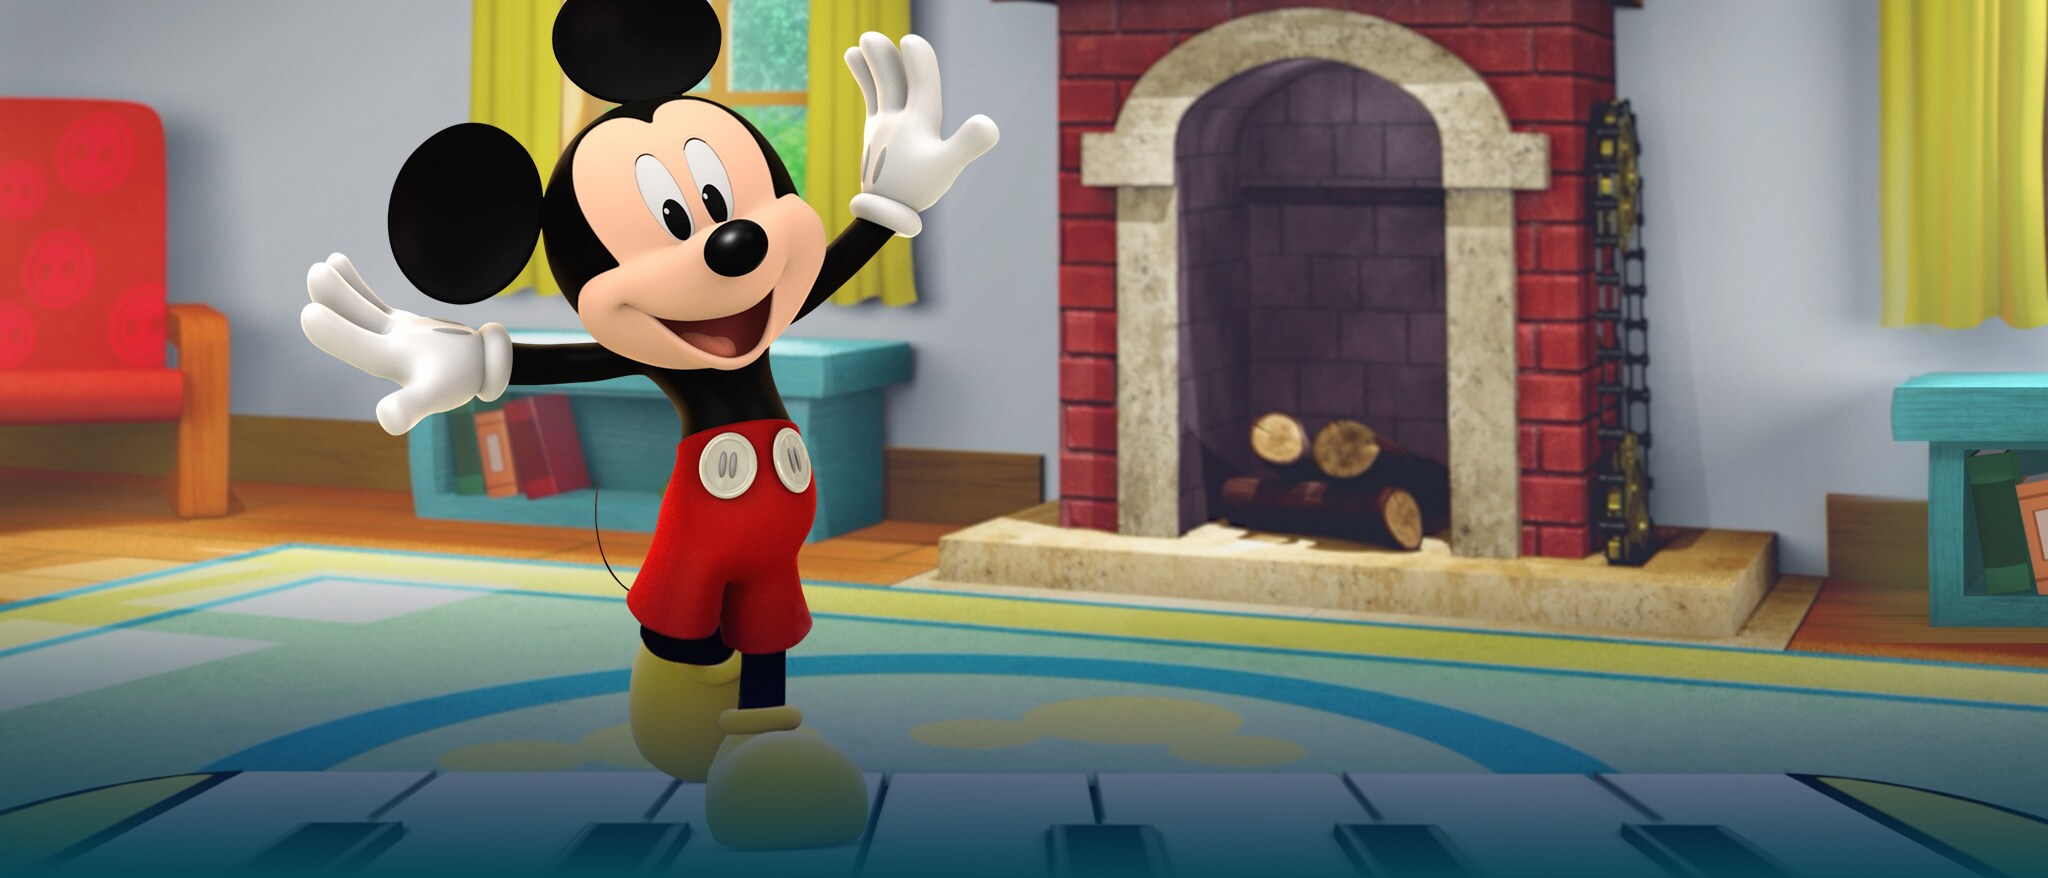 Me & Mickey - Featured Content Banner